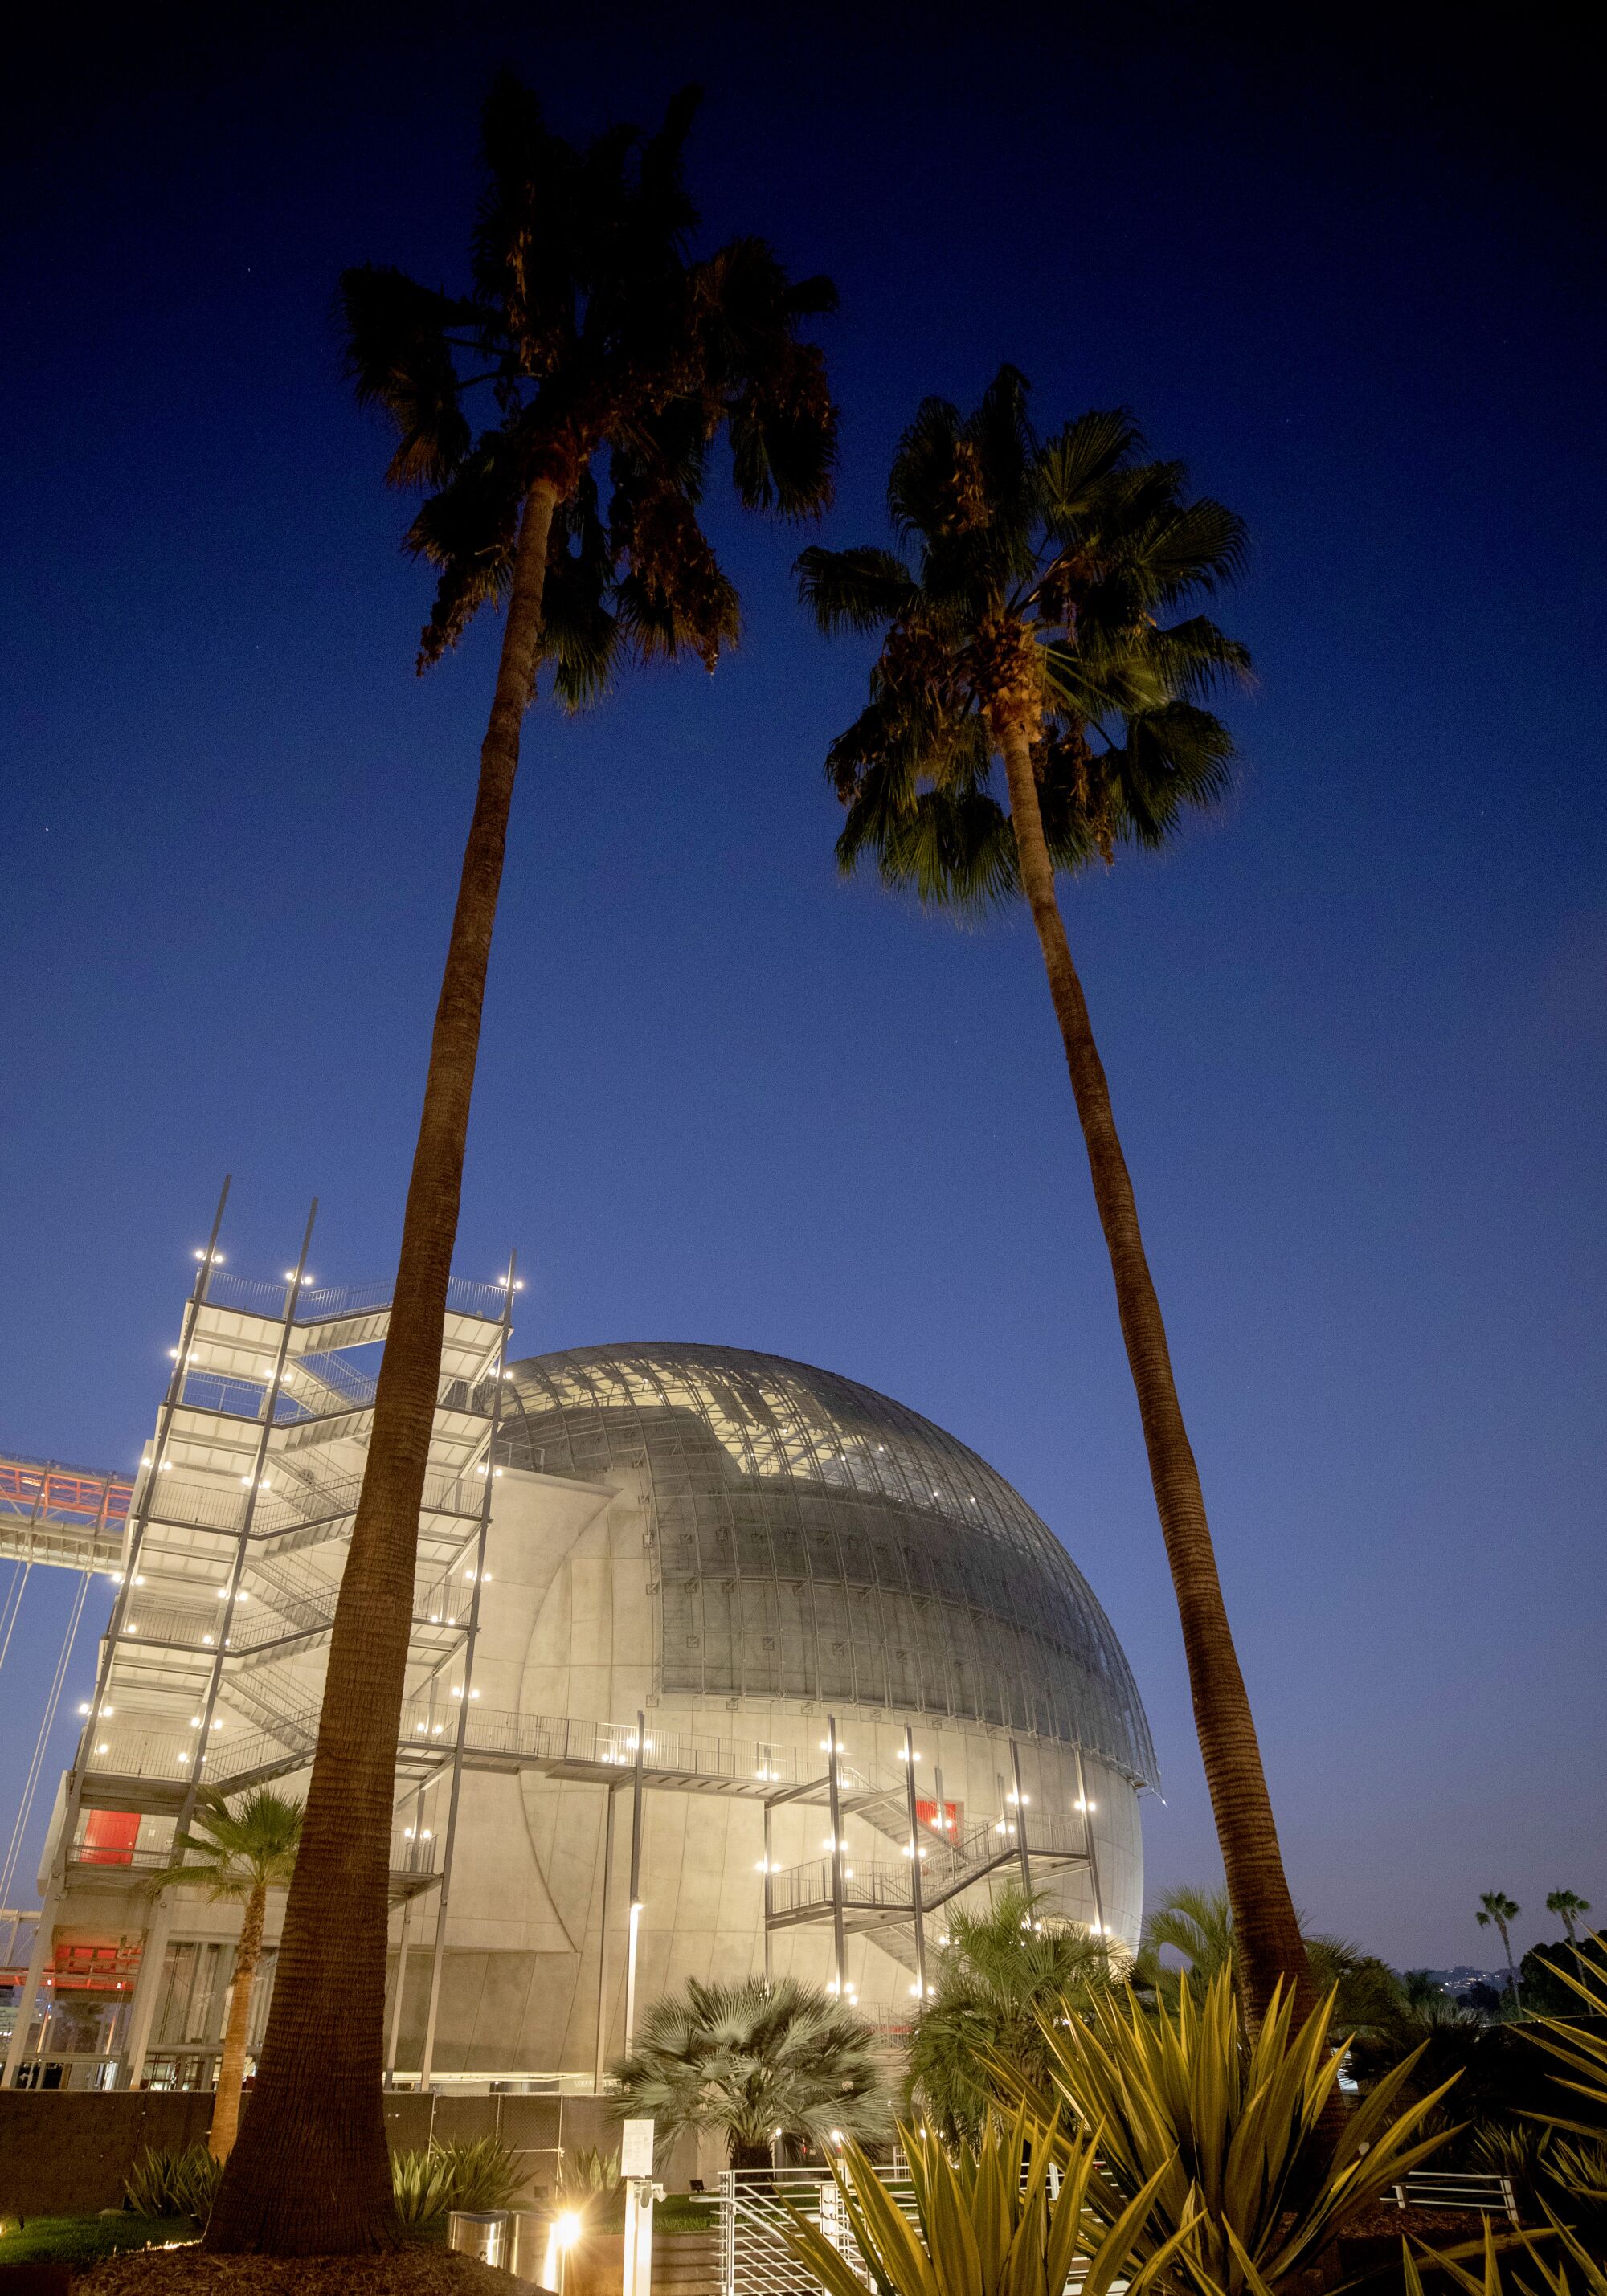 The Academy of Motion Pictures Museum at night.